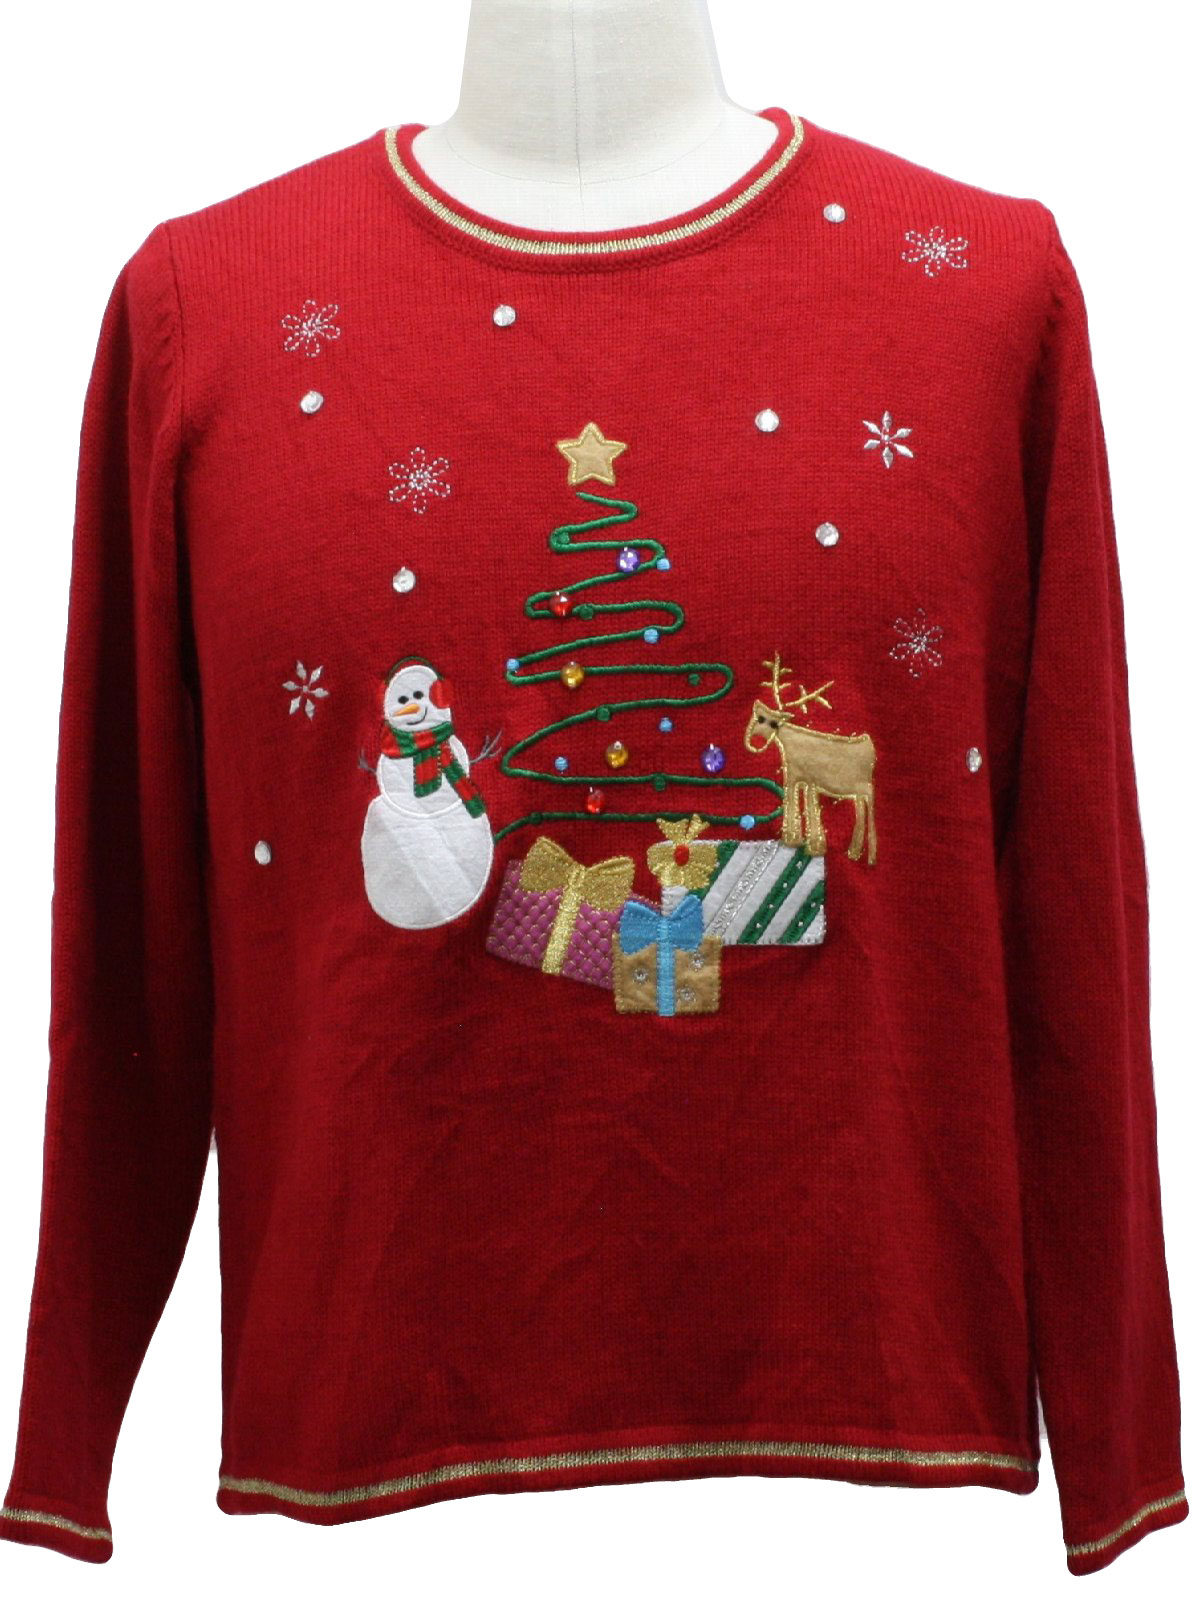 Ugly Christmas Sweater: -Care Label Only- Unisex red, white, tan and ...